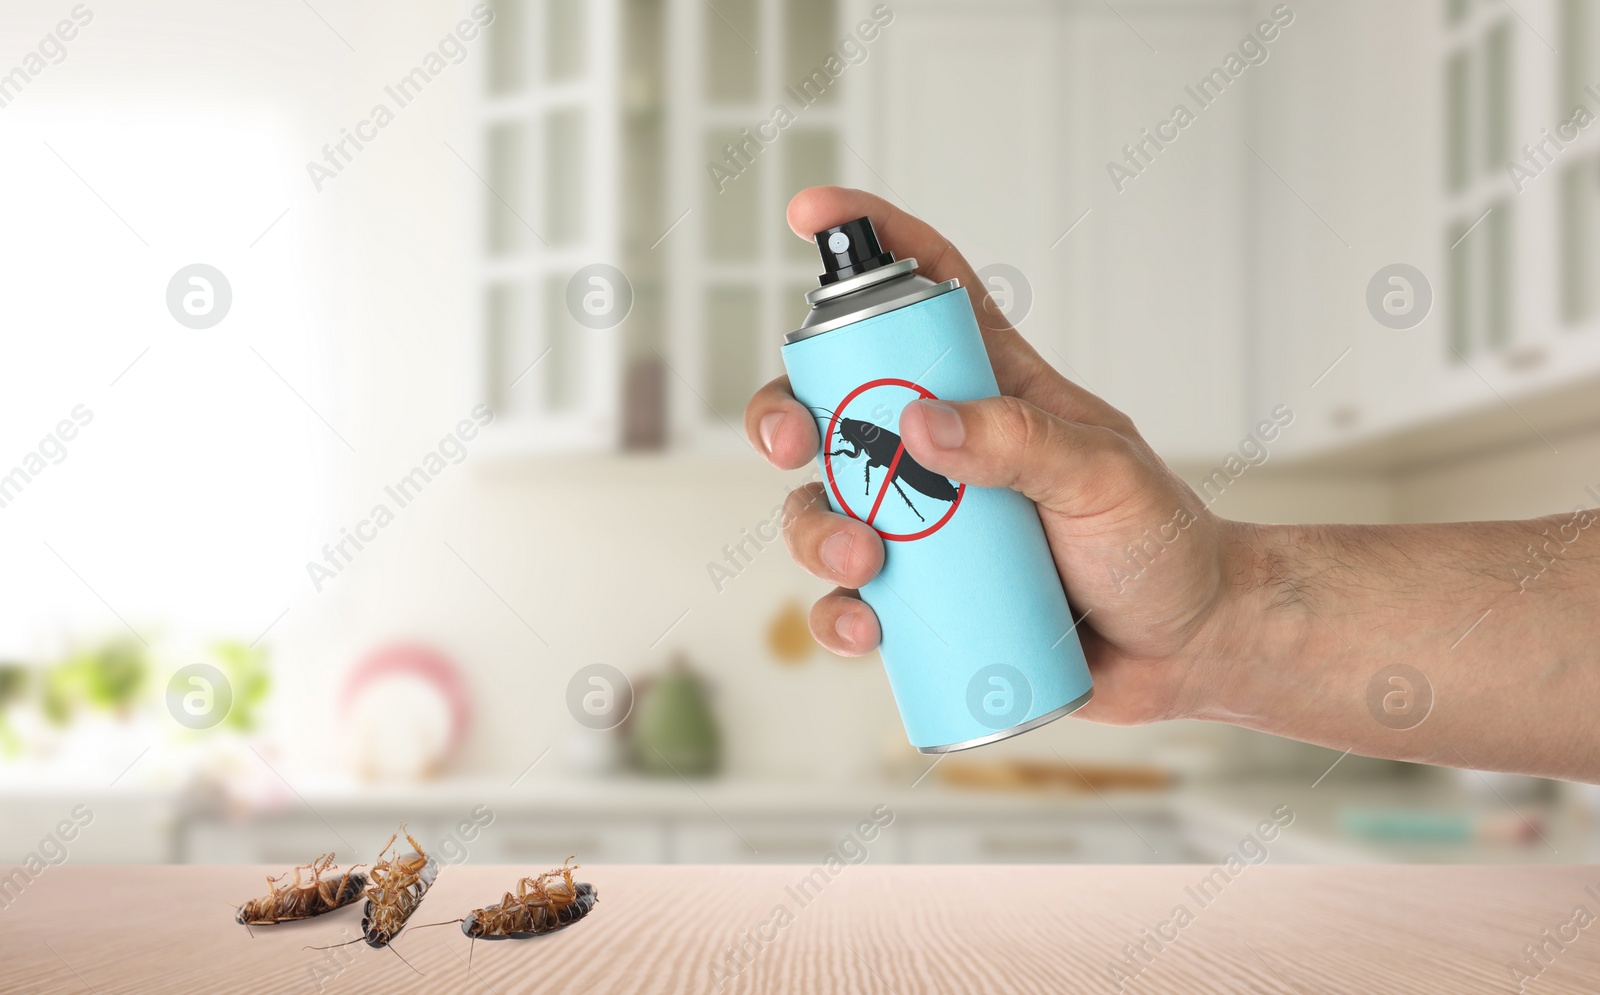 Image of Pest control. Man spraying insecticide near dead cockroaches on table in kitchen, closeup